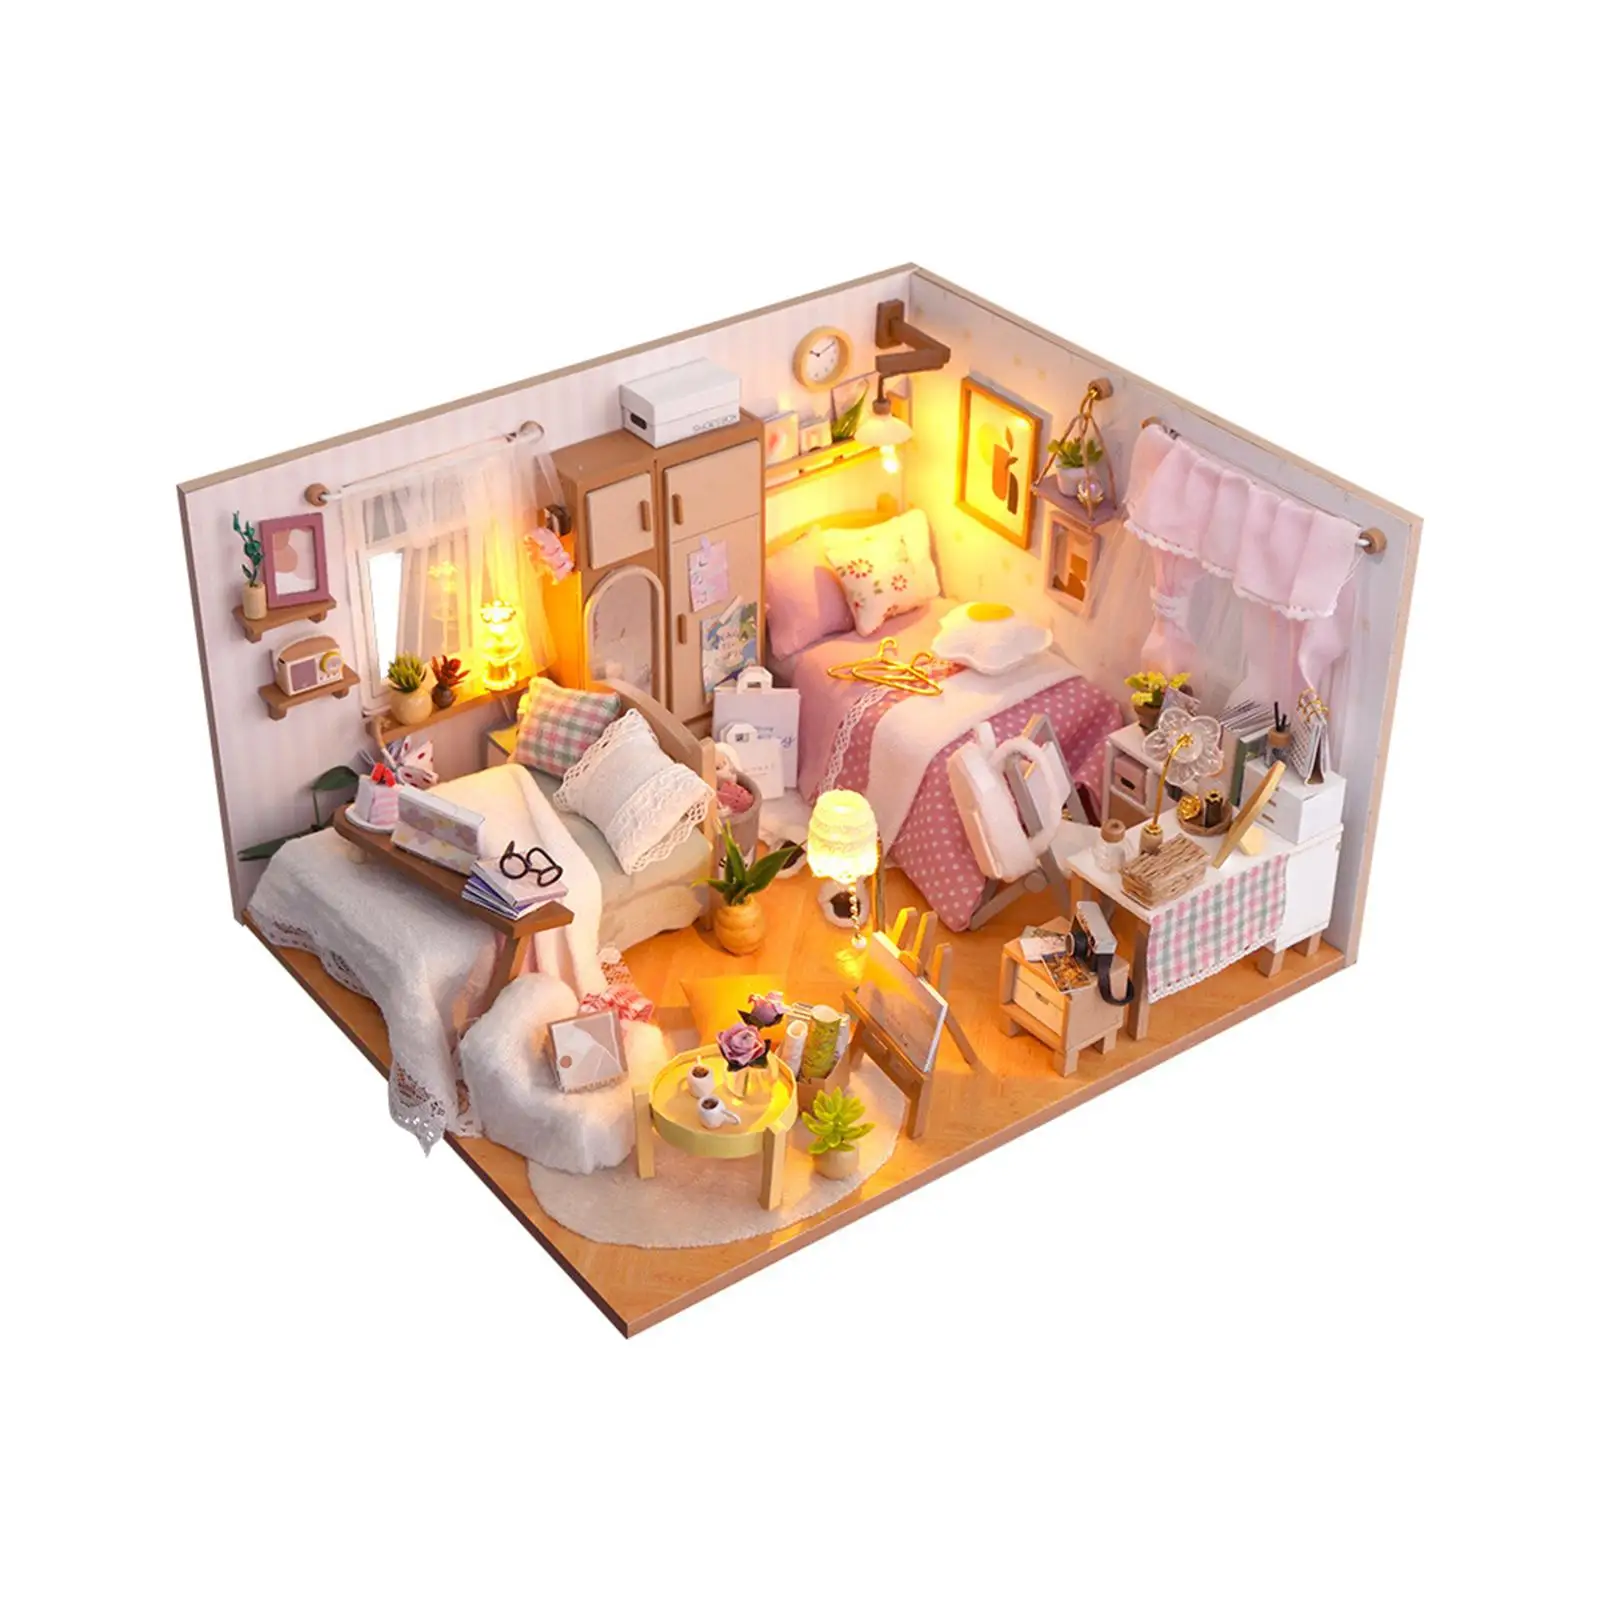 Wooden Miniature Dollhouse Kits with Lights for Boys Girls Creative Bedroom